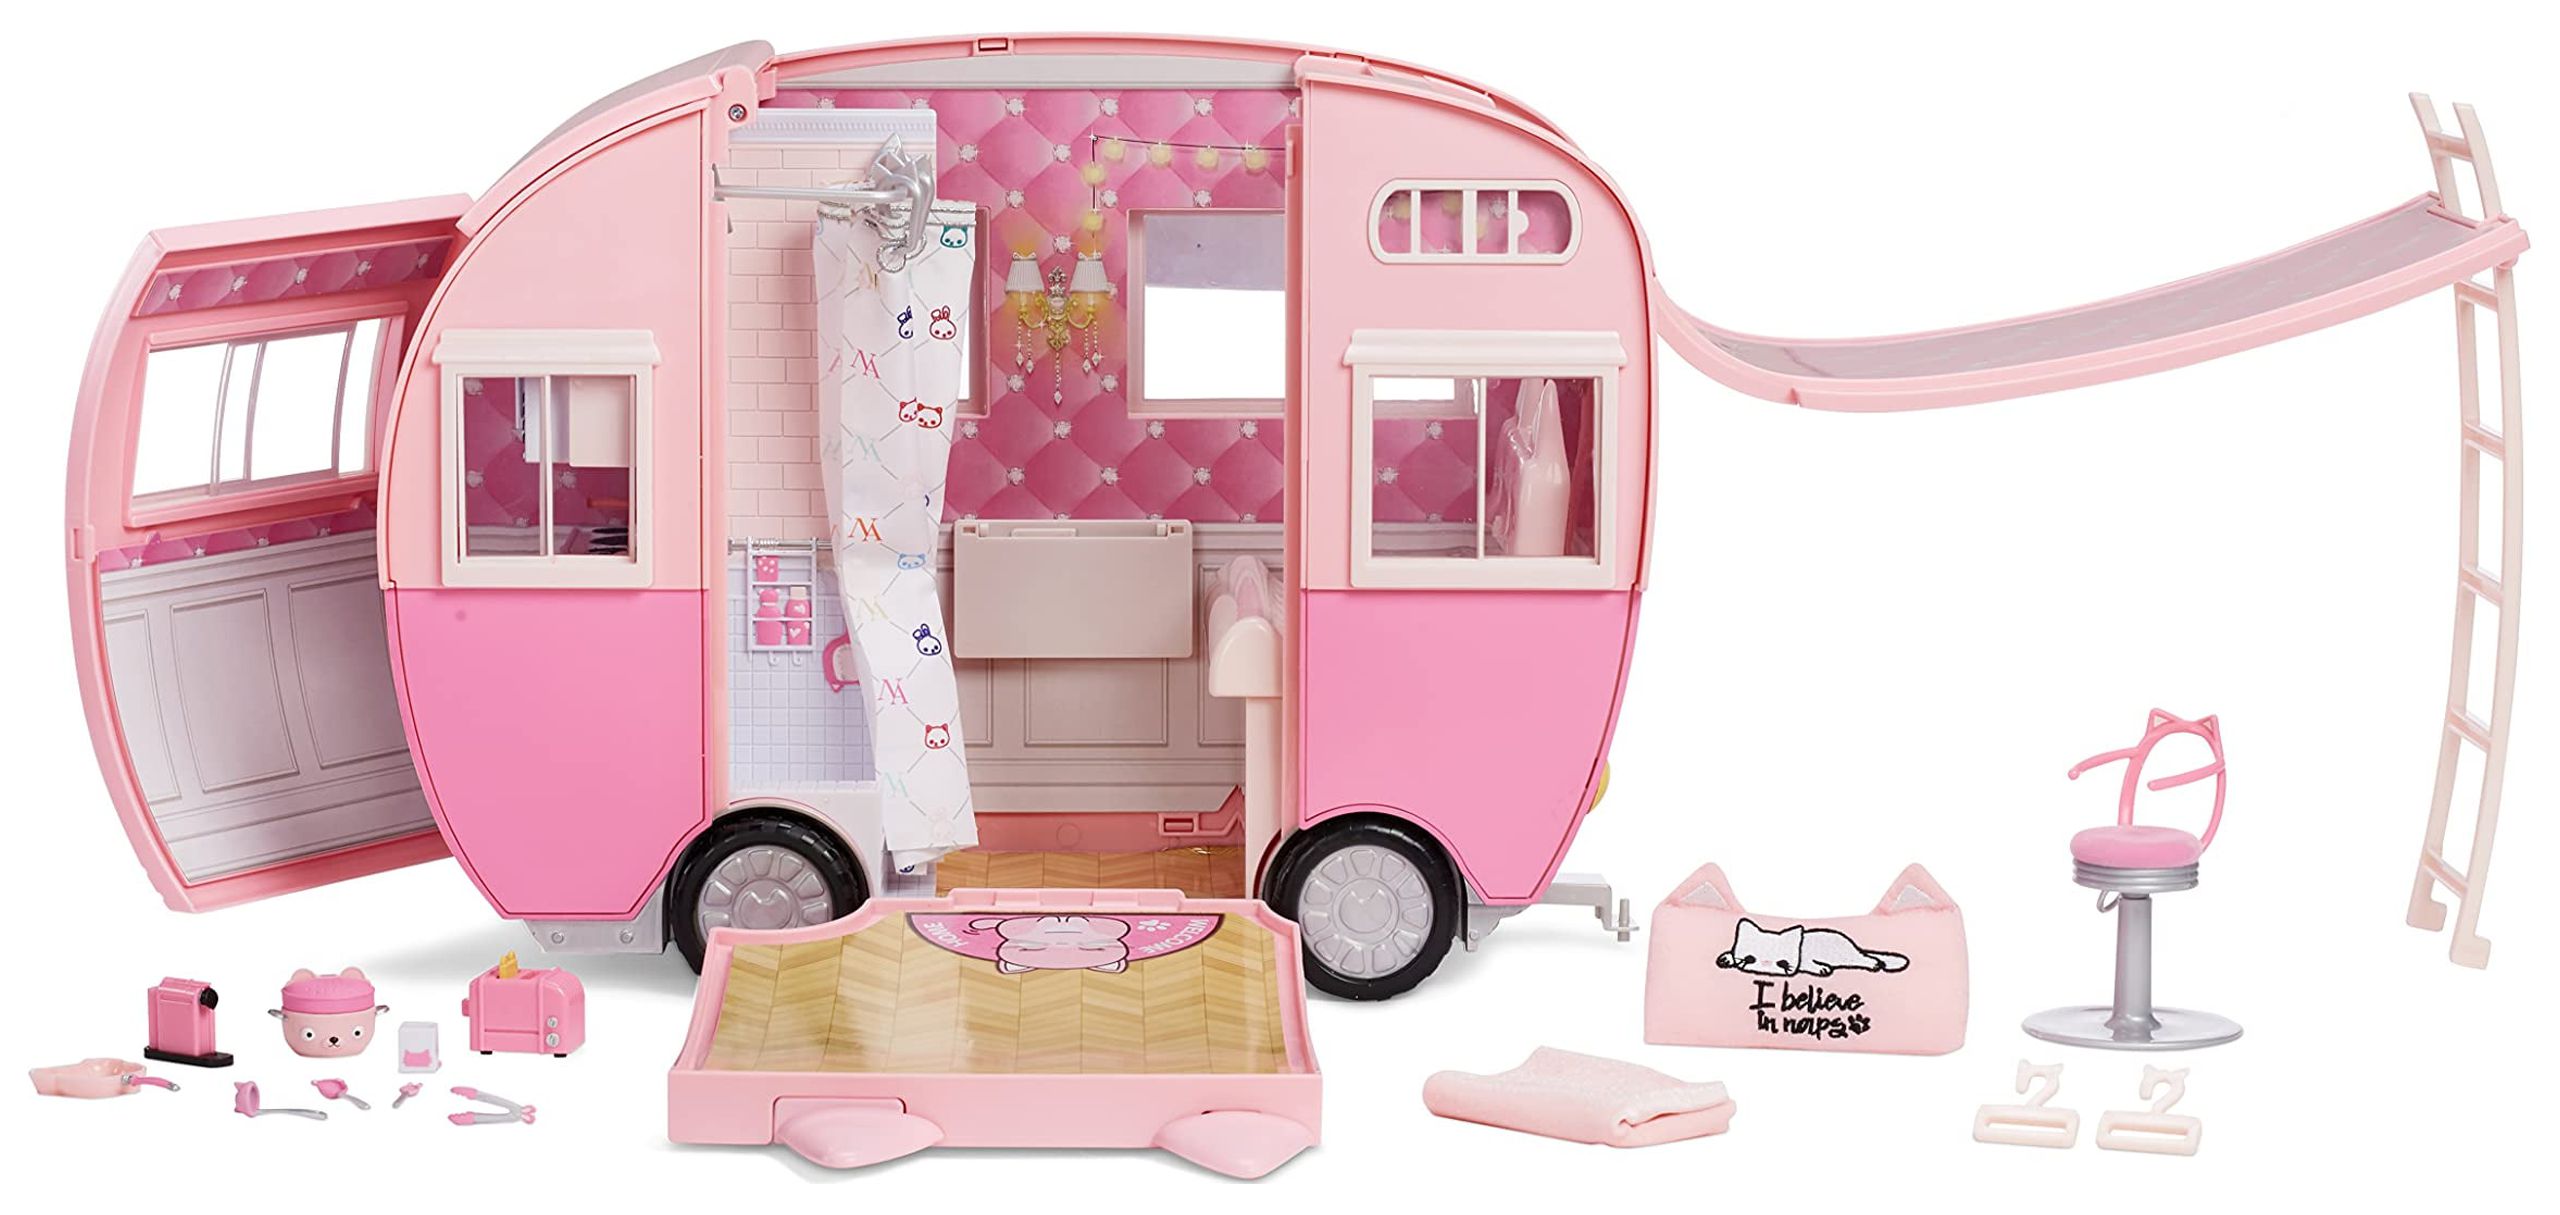 Na Na Na Surprise Kitty-Cat Camper Playset, Pink Toy Car Vehicle for Fashion Dolls with Cat Ears & Tail, Opens to 3 Feet Wide for 360 Play, 7 Play Areas, Accessories, Gift for Kids Ages 5 6 7 8+ Years - image 1 of 11